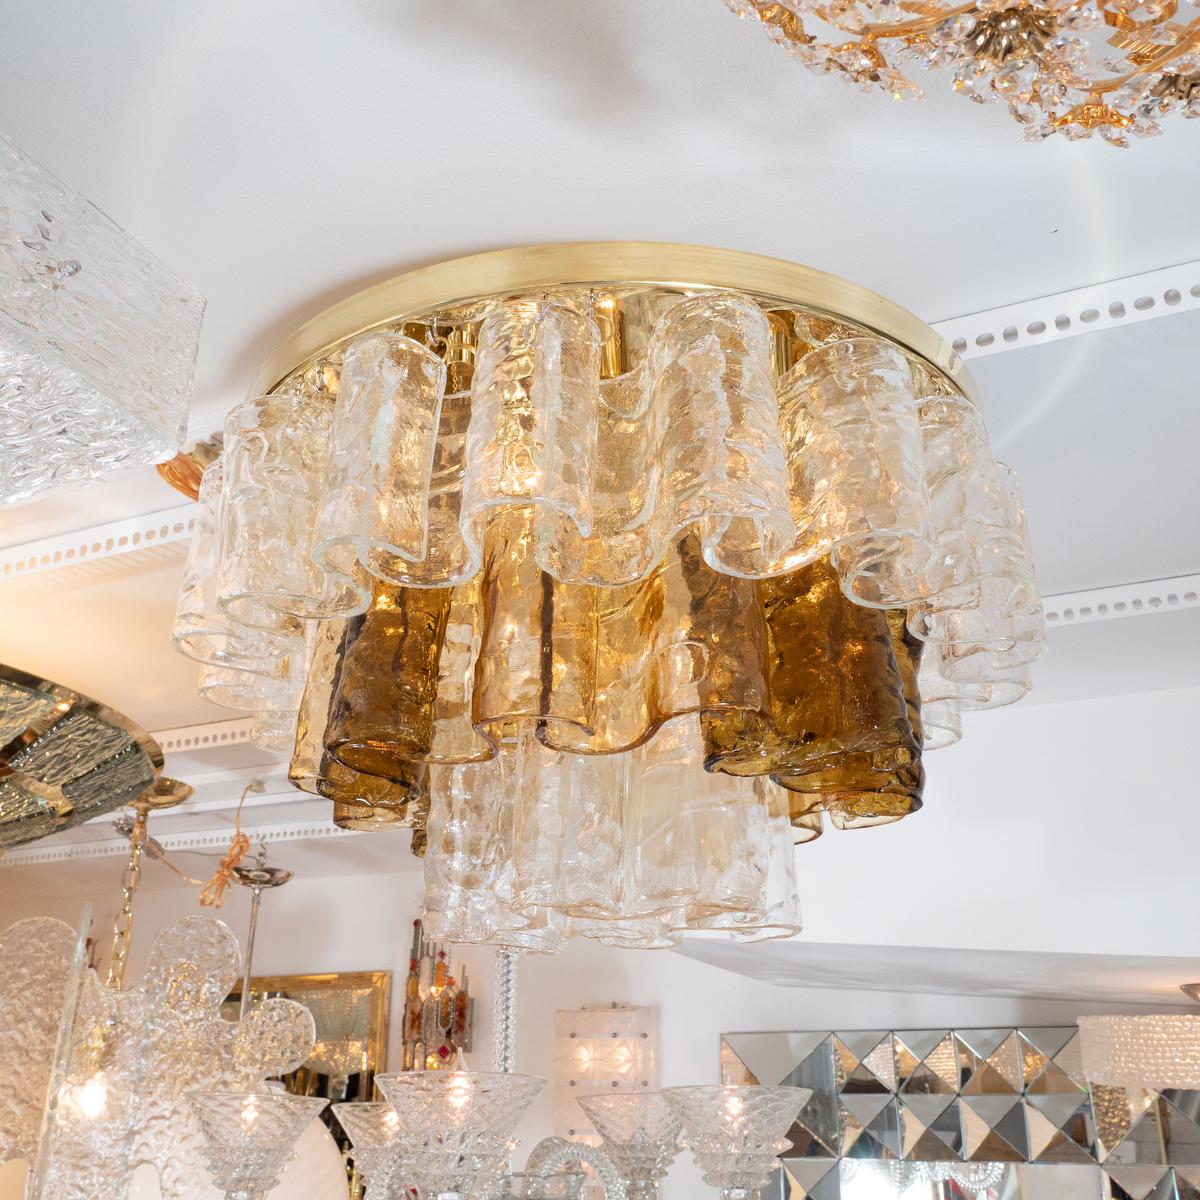 Brass flushmount fixture composed of suspended clear and amber scrolled Murano glass elements by Mazzega.